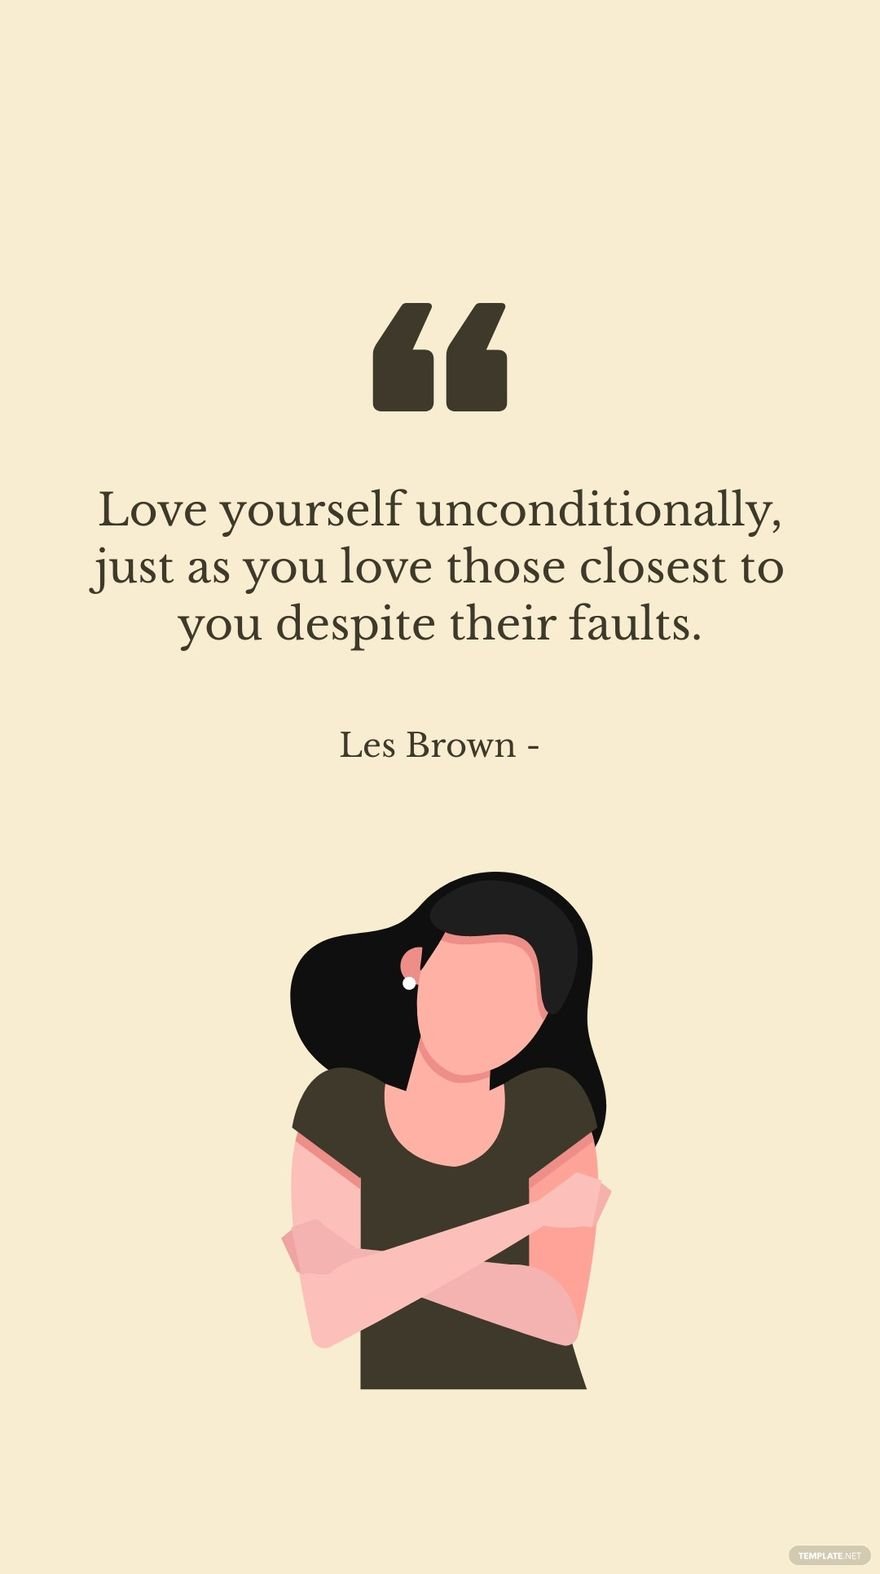 Free Les Brown - Love yourself unconditionally, just as you love those closest to you despite their faults. in JPG